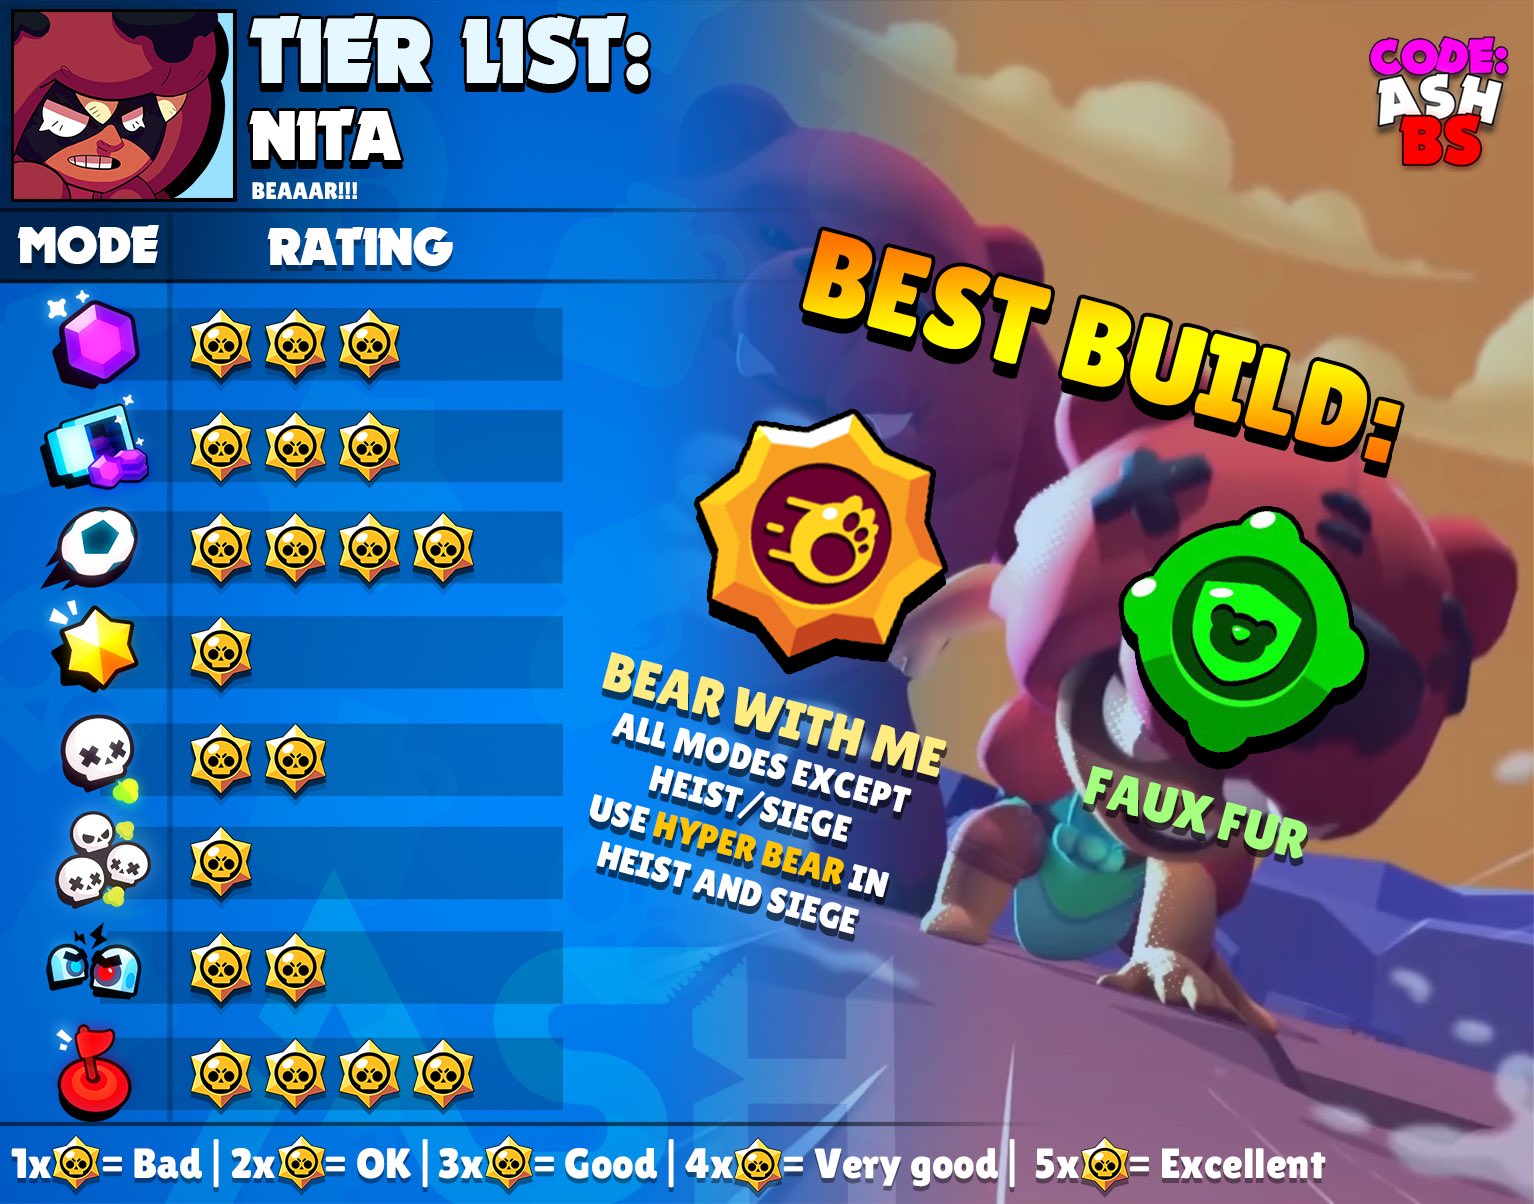 Code Ashbs A Twitter Nita Tier List For All Game Modes And The Best Maps To Use Her With Suggested Comps Use Hyper Bear For Heist But Use Her New Gadget Faux - brawl stars nita nova tigre